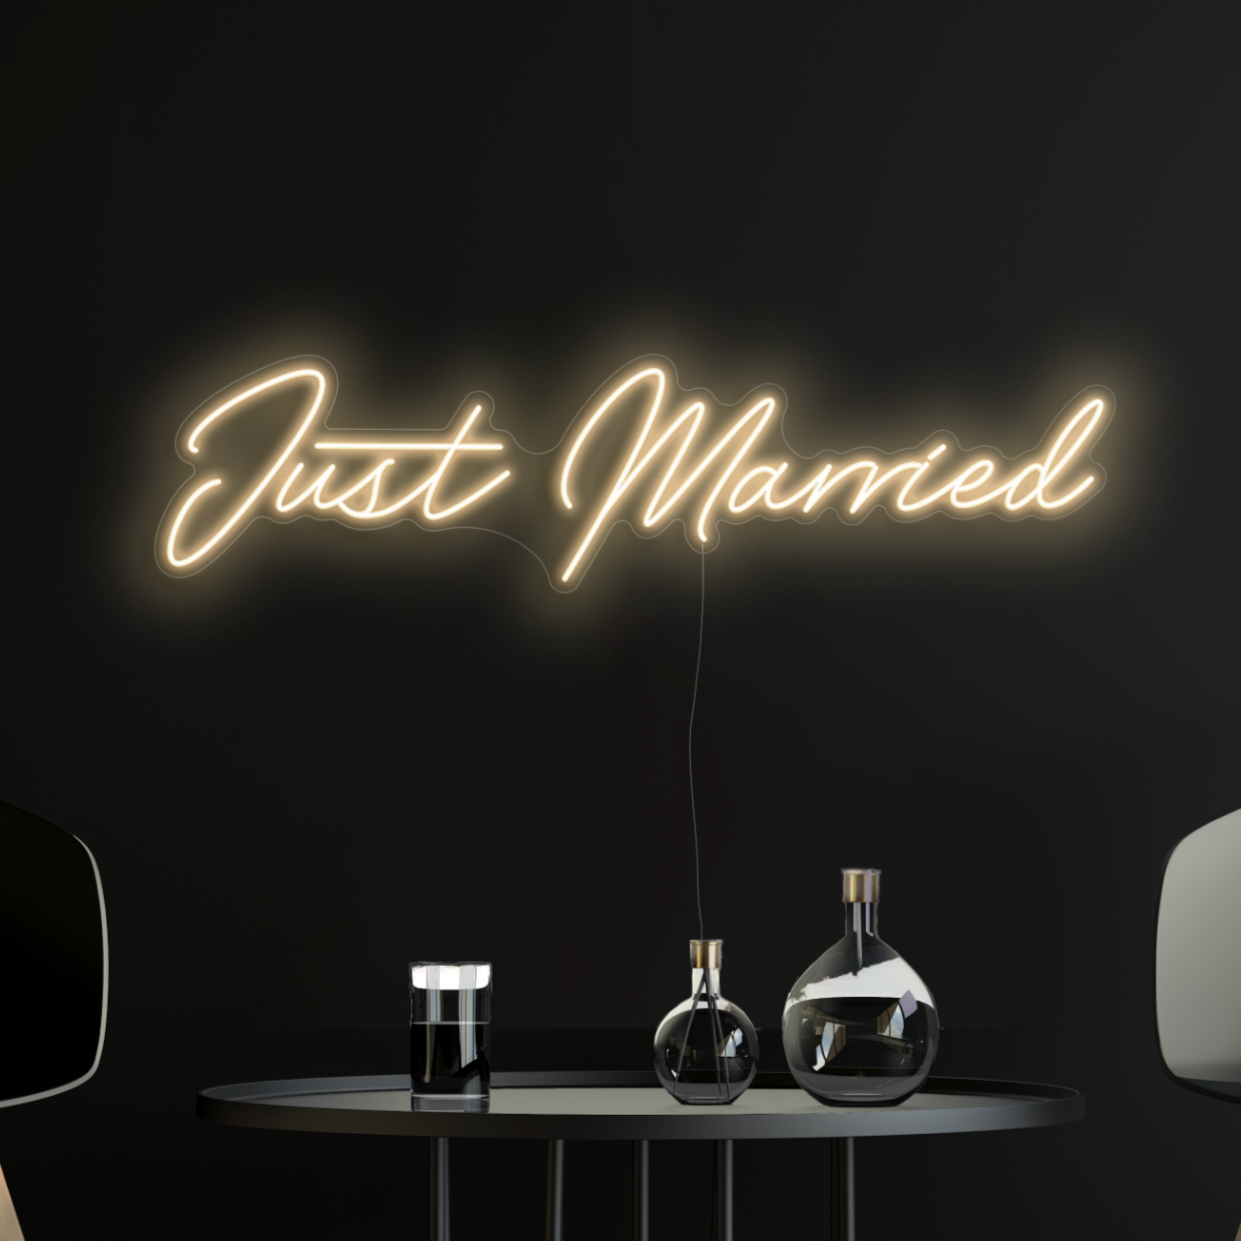 Just Married Neon Sign in cosy warm white